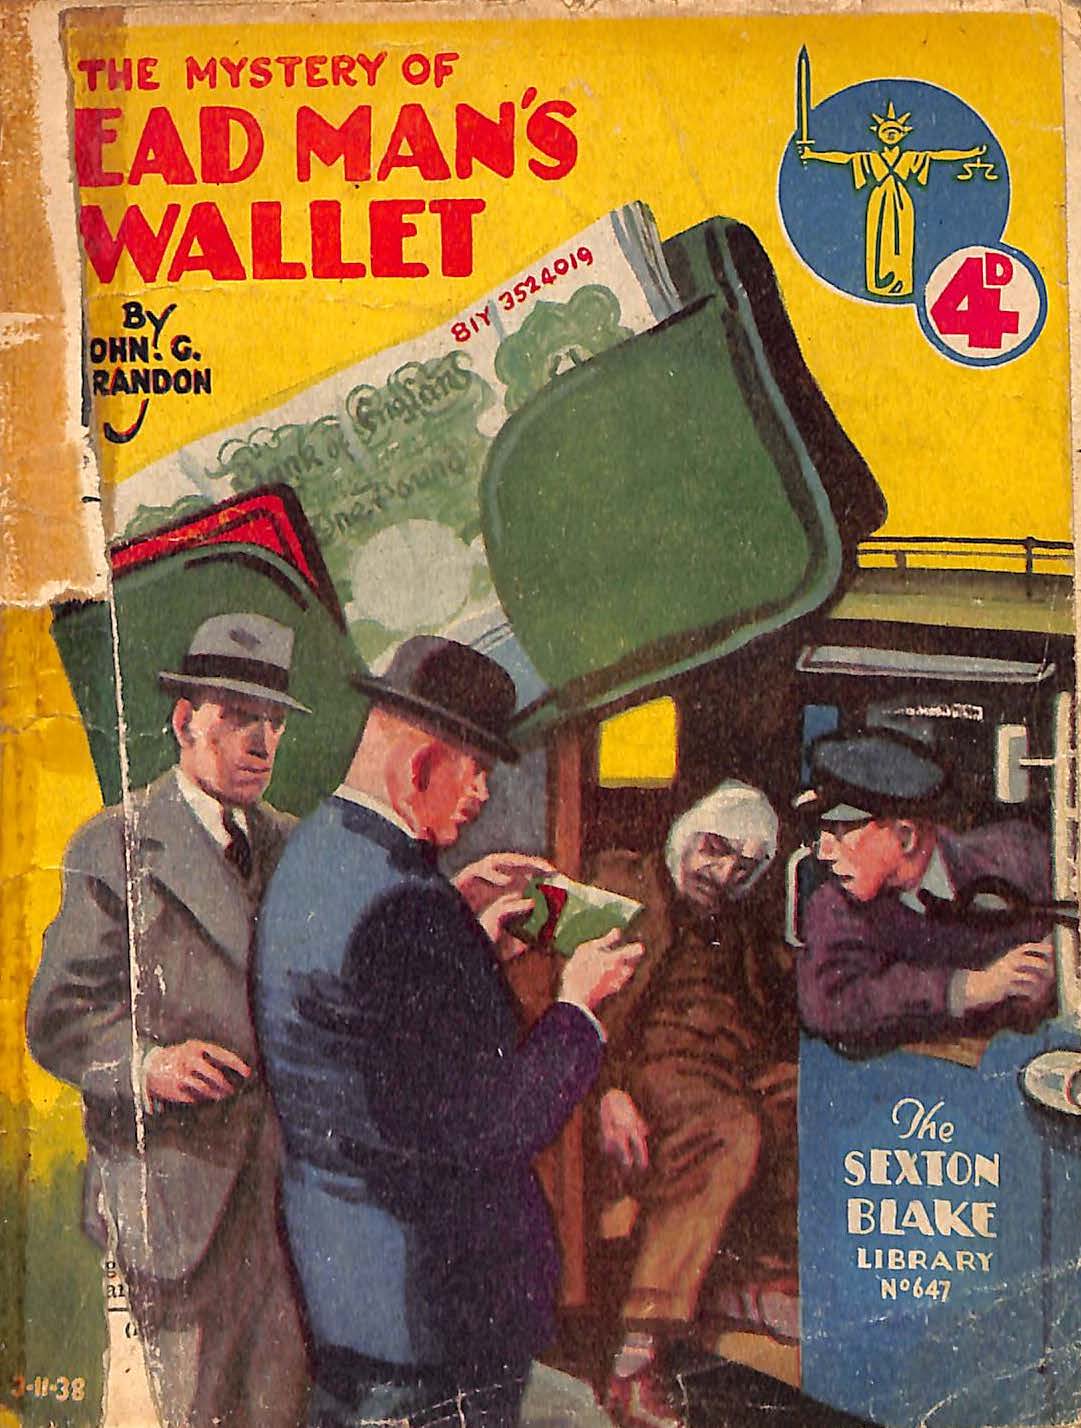 Comic Book Cover For Sexton Blake Library S2 647 - The Mystery of the Dead Man's Wallet